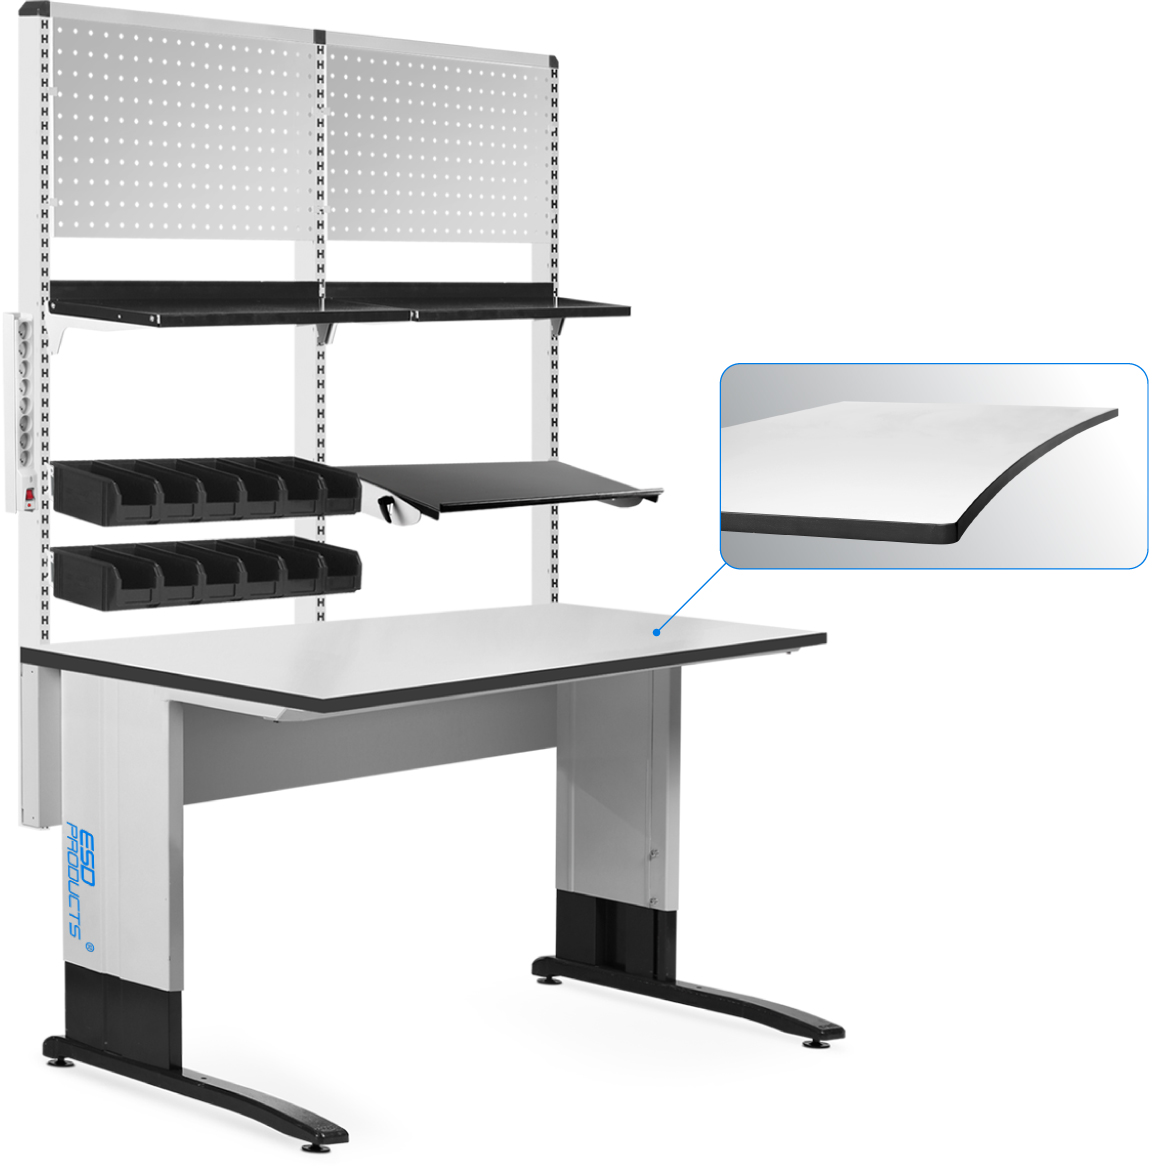 Premium-Worktable-ESD-Ergonomic-Table-Top-Reeco-Ischa-1530-x-800-mm-ESD-Products-AES